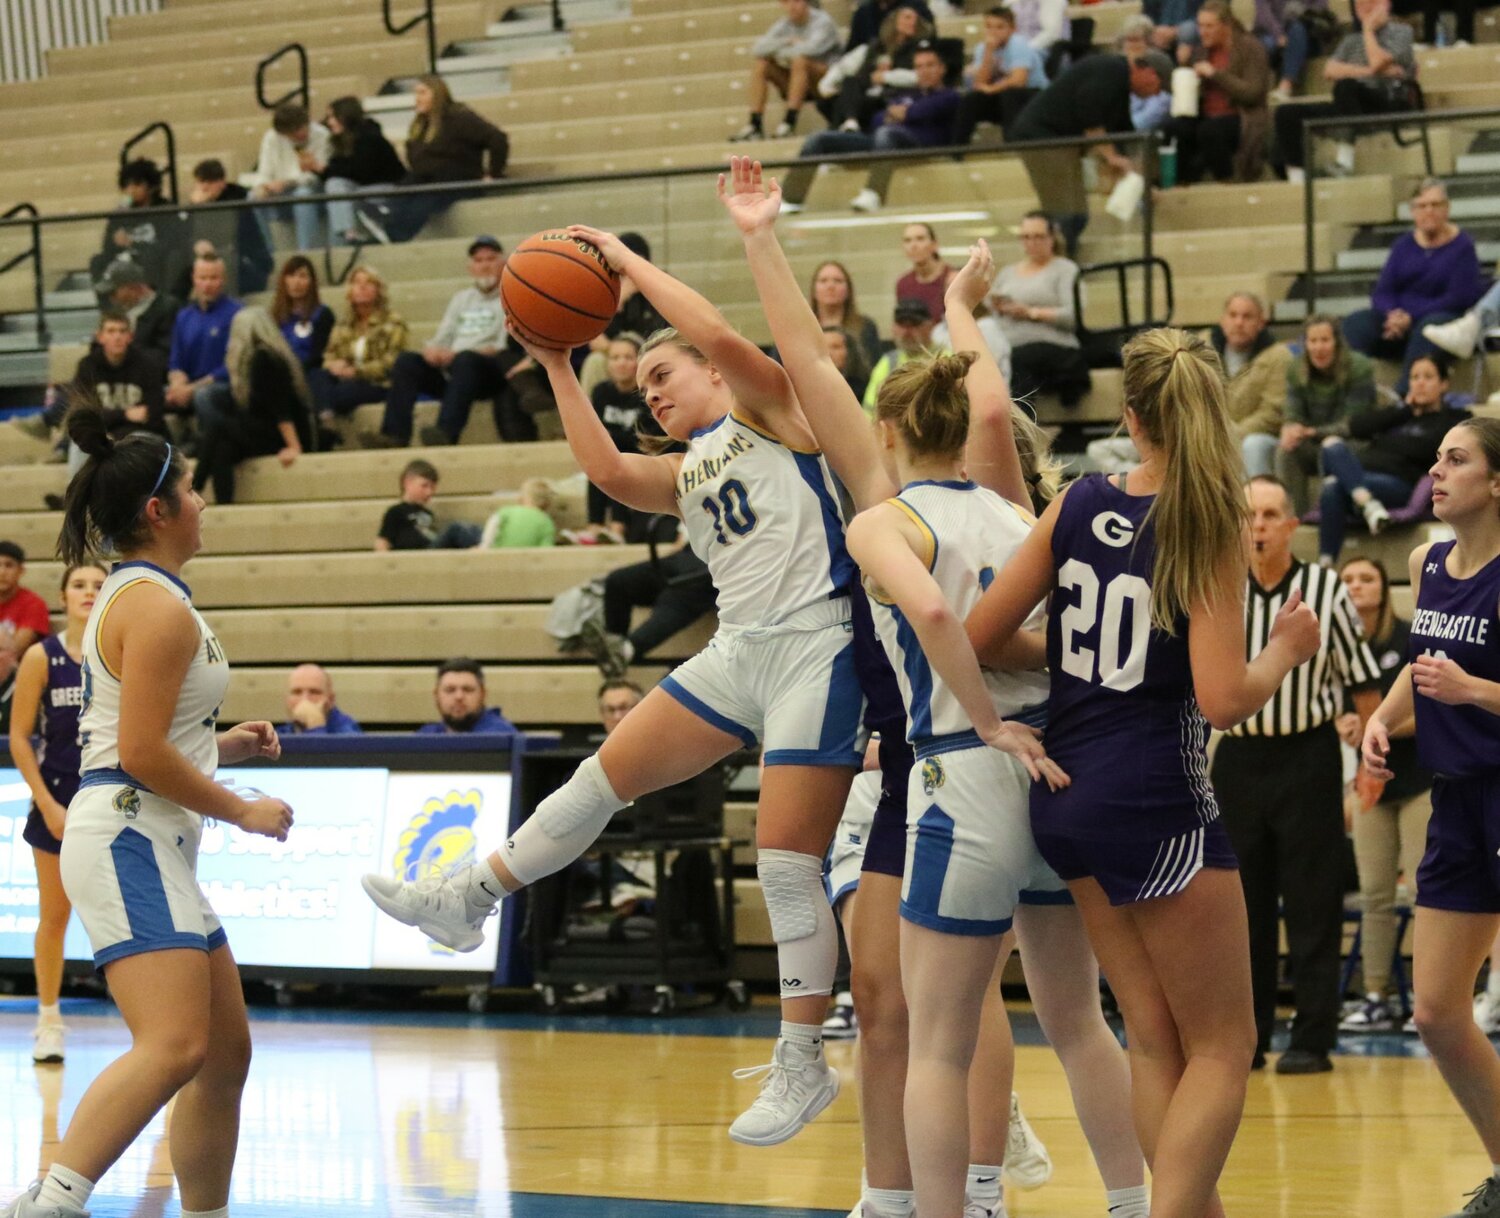 Molly Pierce skies for this rebound during the girls game.